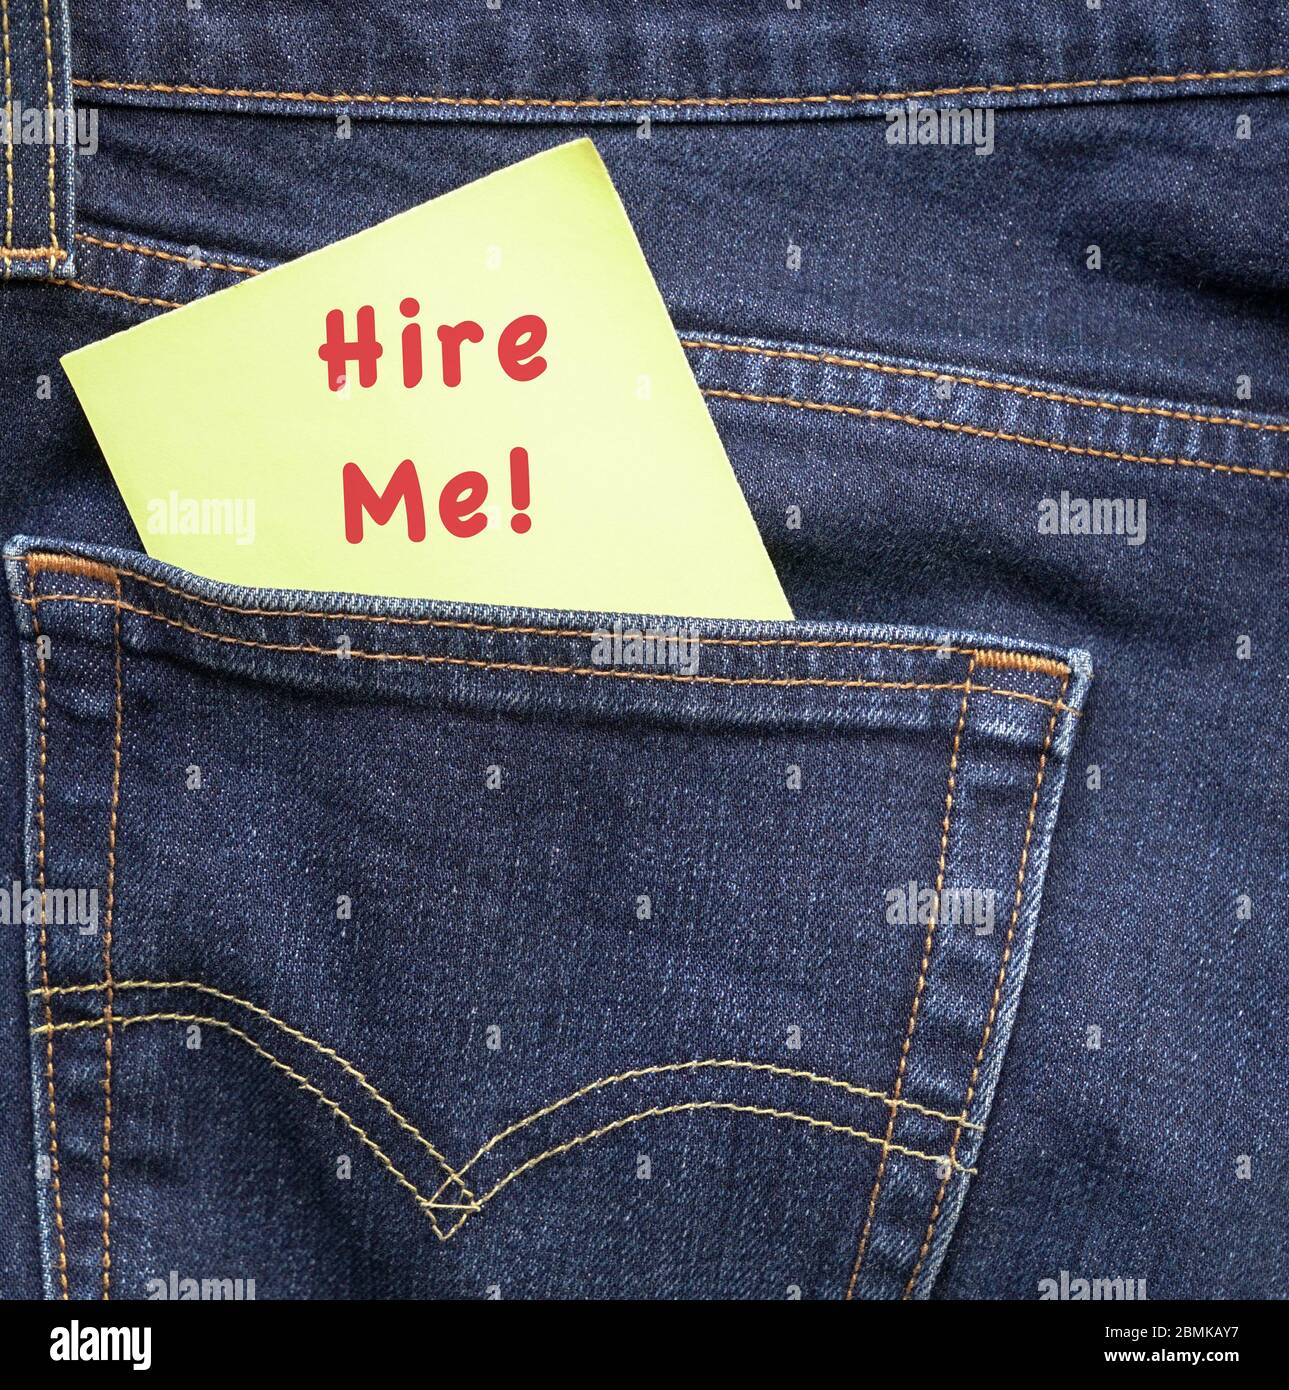 Hire me, words in red on a yellow paper stuck out from jeans pocket. Employment or jobs concept. Stock Photo